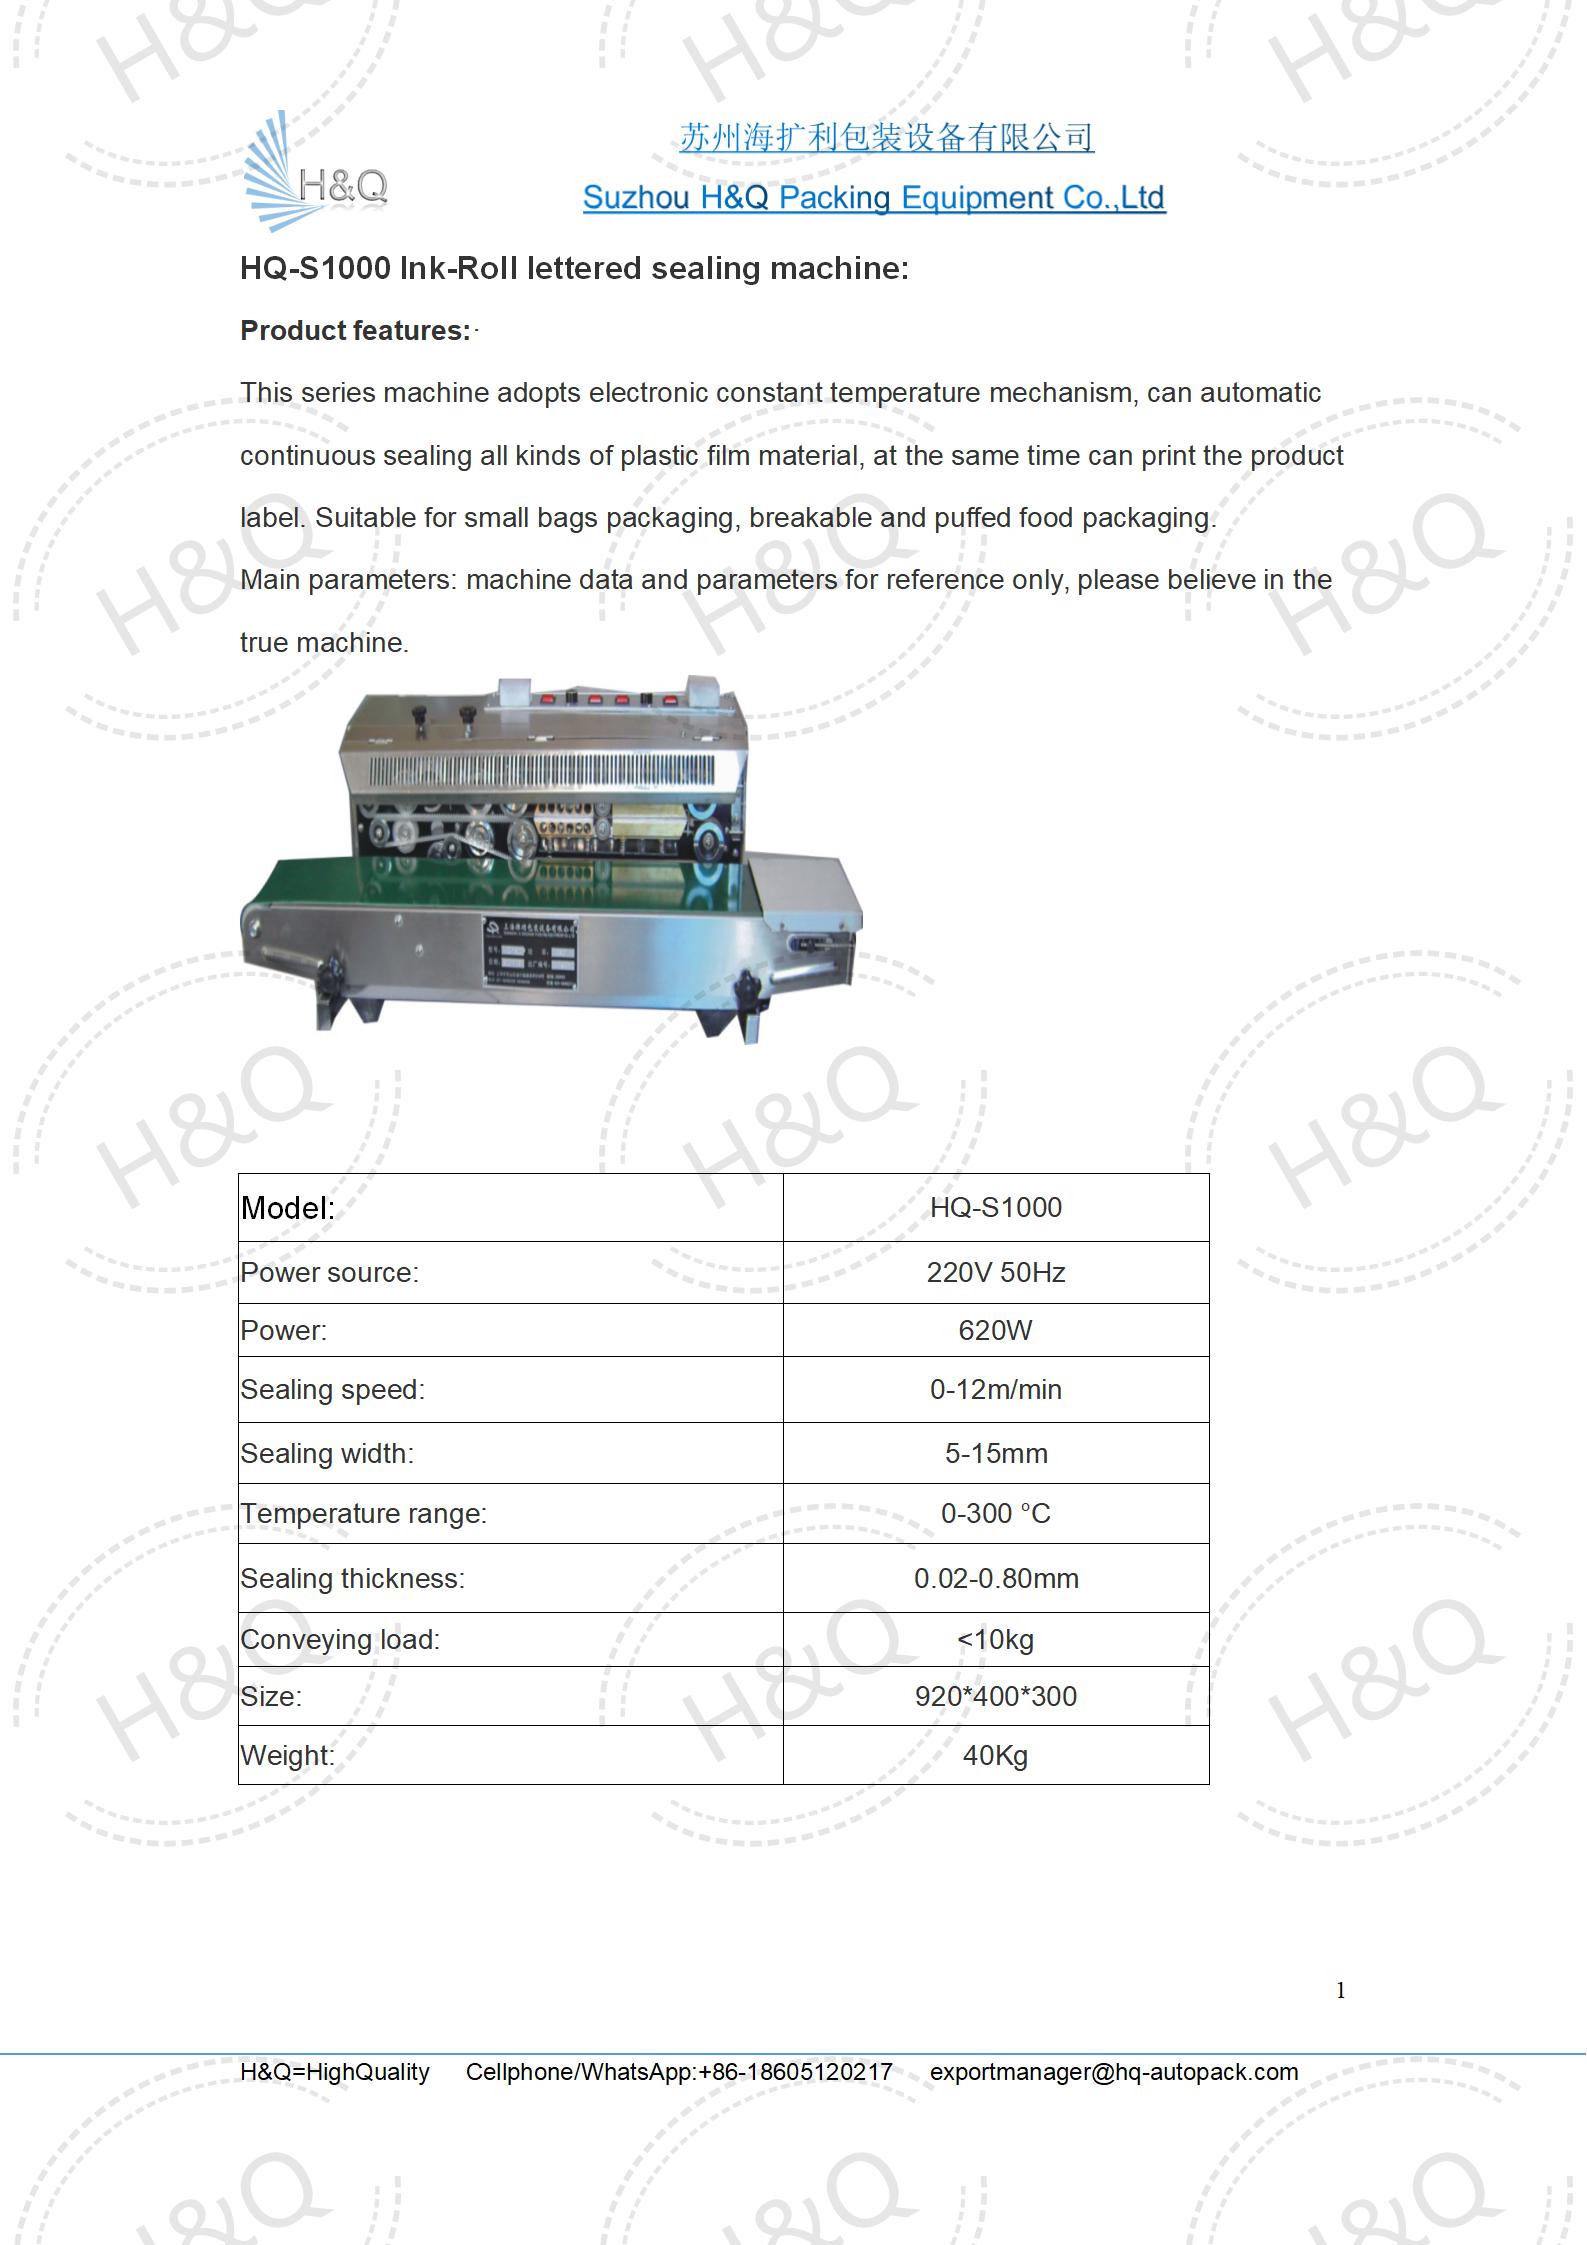 HQ-S1000 Ink-Roll lettered sealing machine_01.jpg